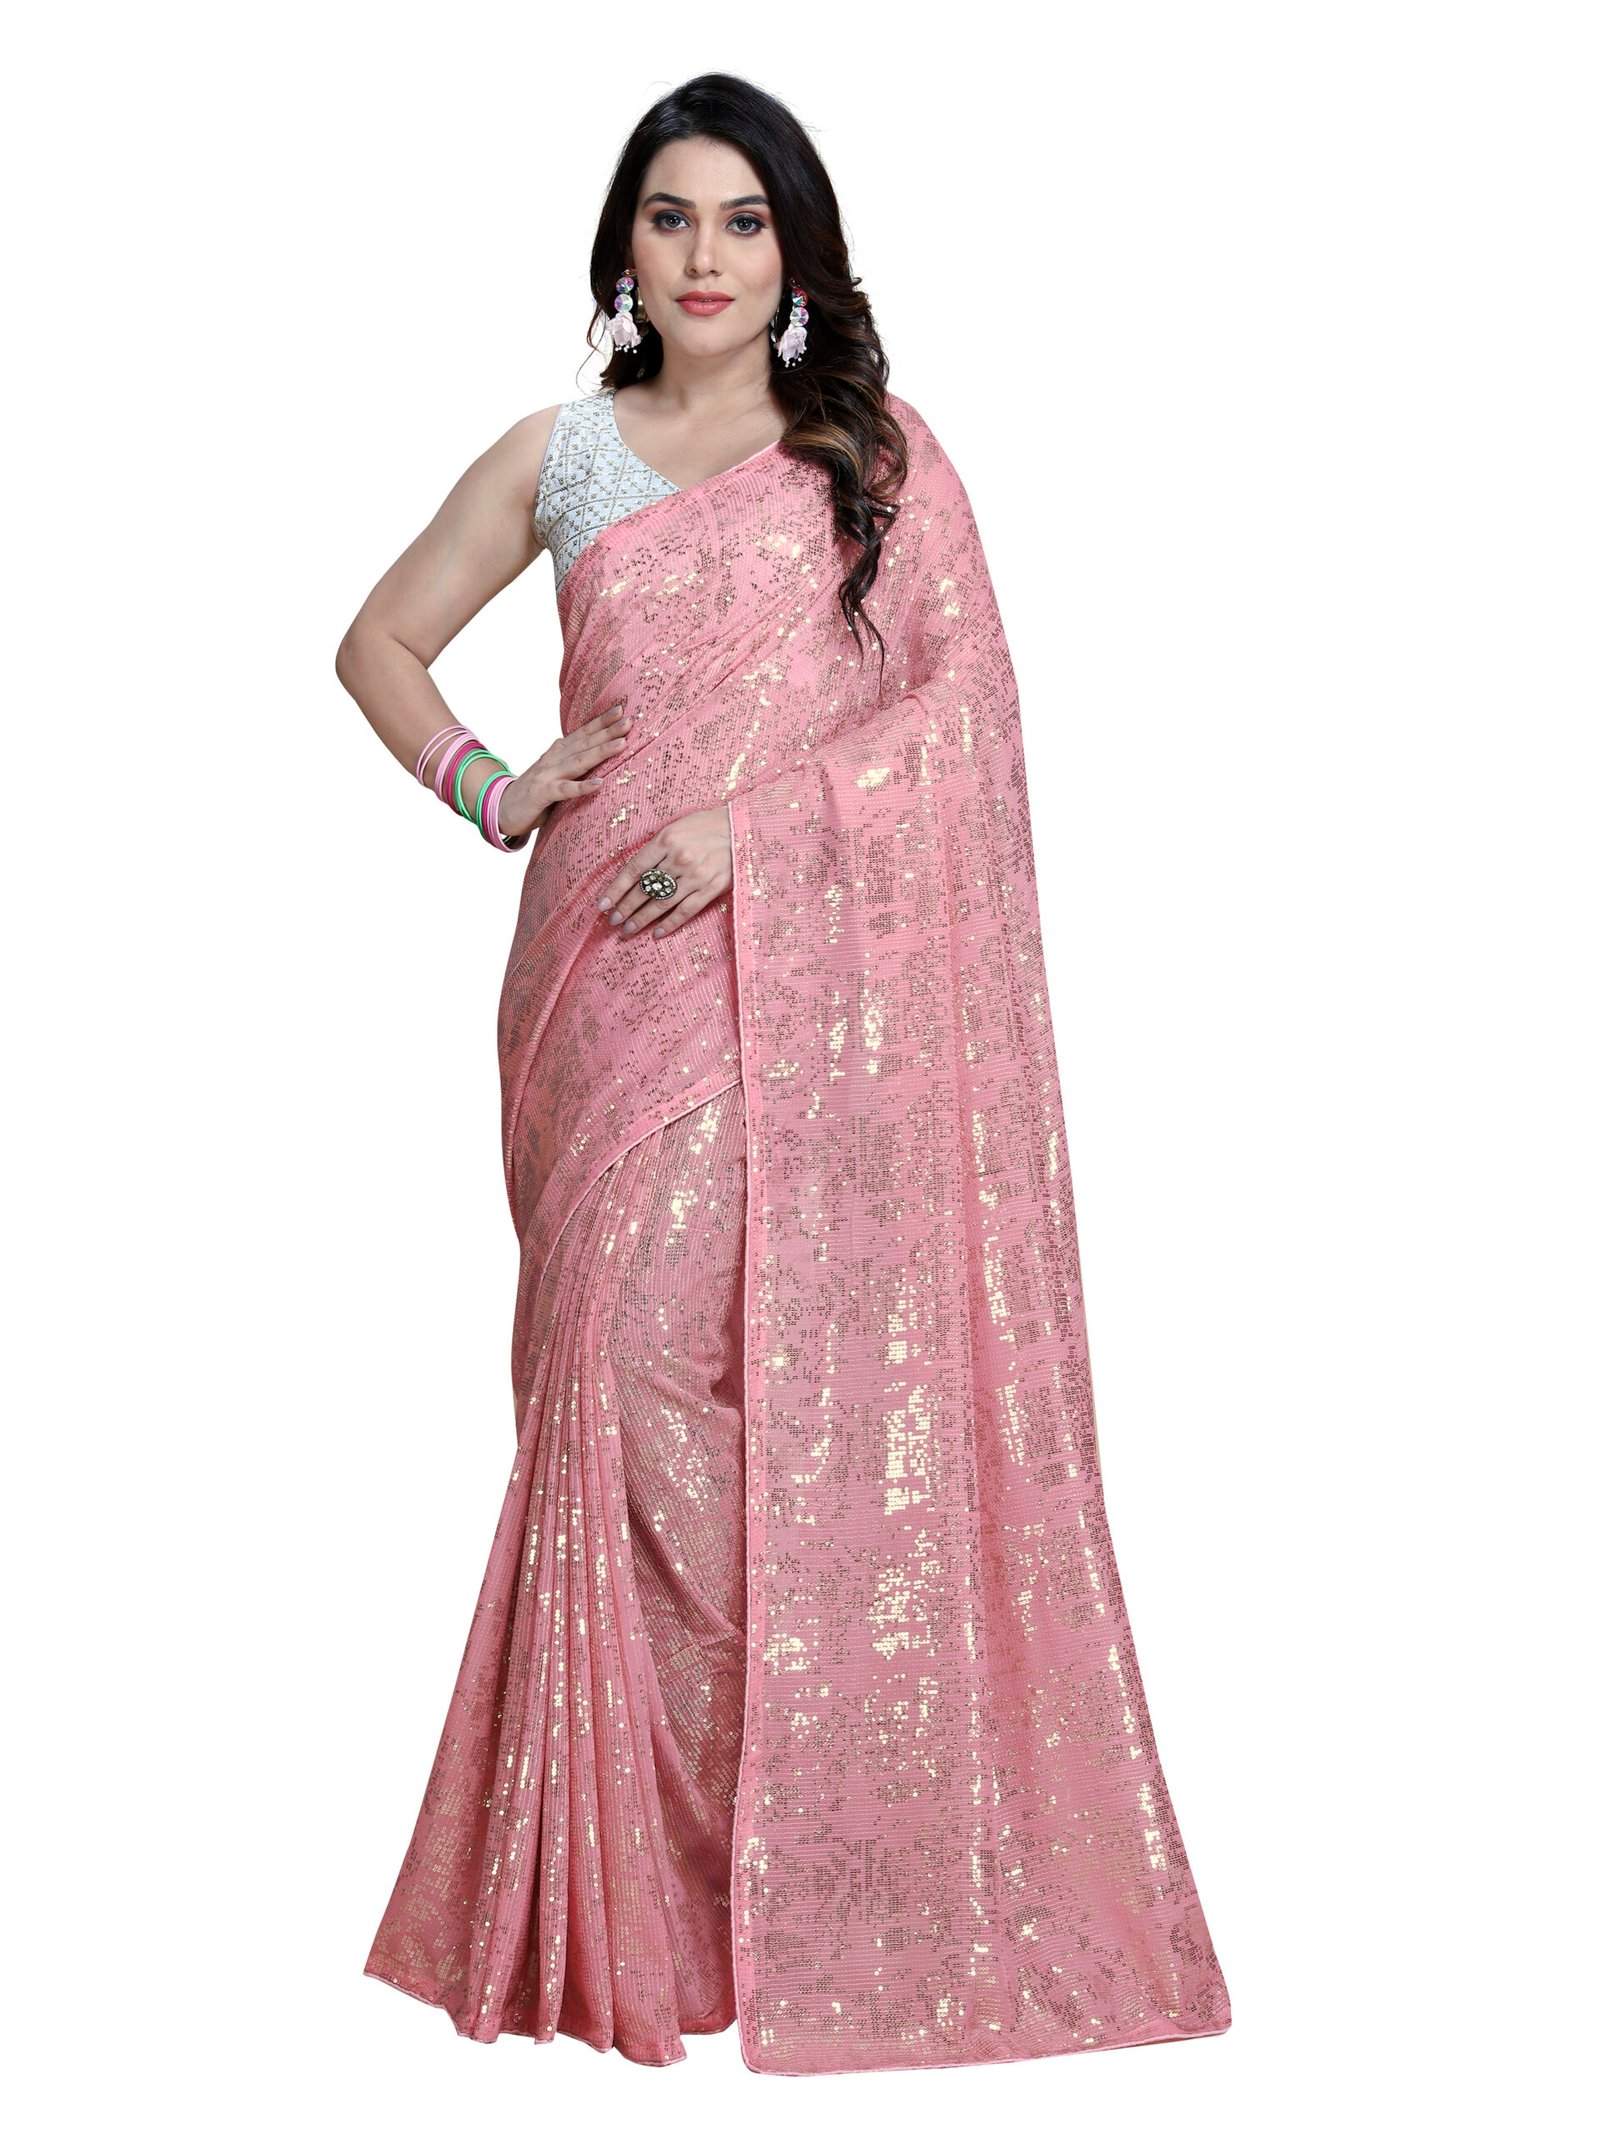 Shapewear For Saree Online - Designer Sarees Rs 500 to 1000 